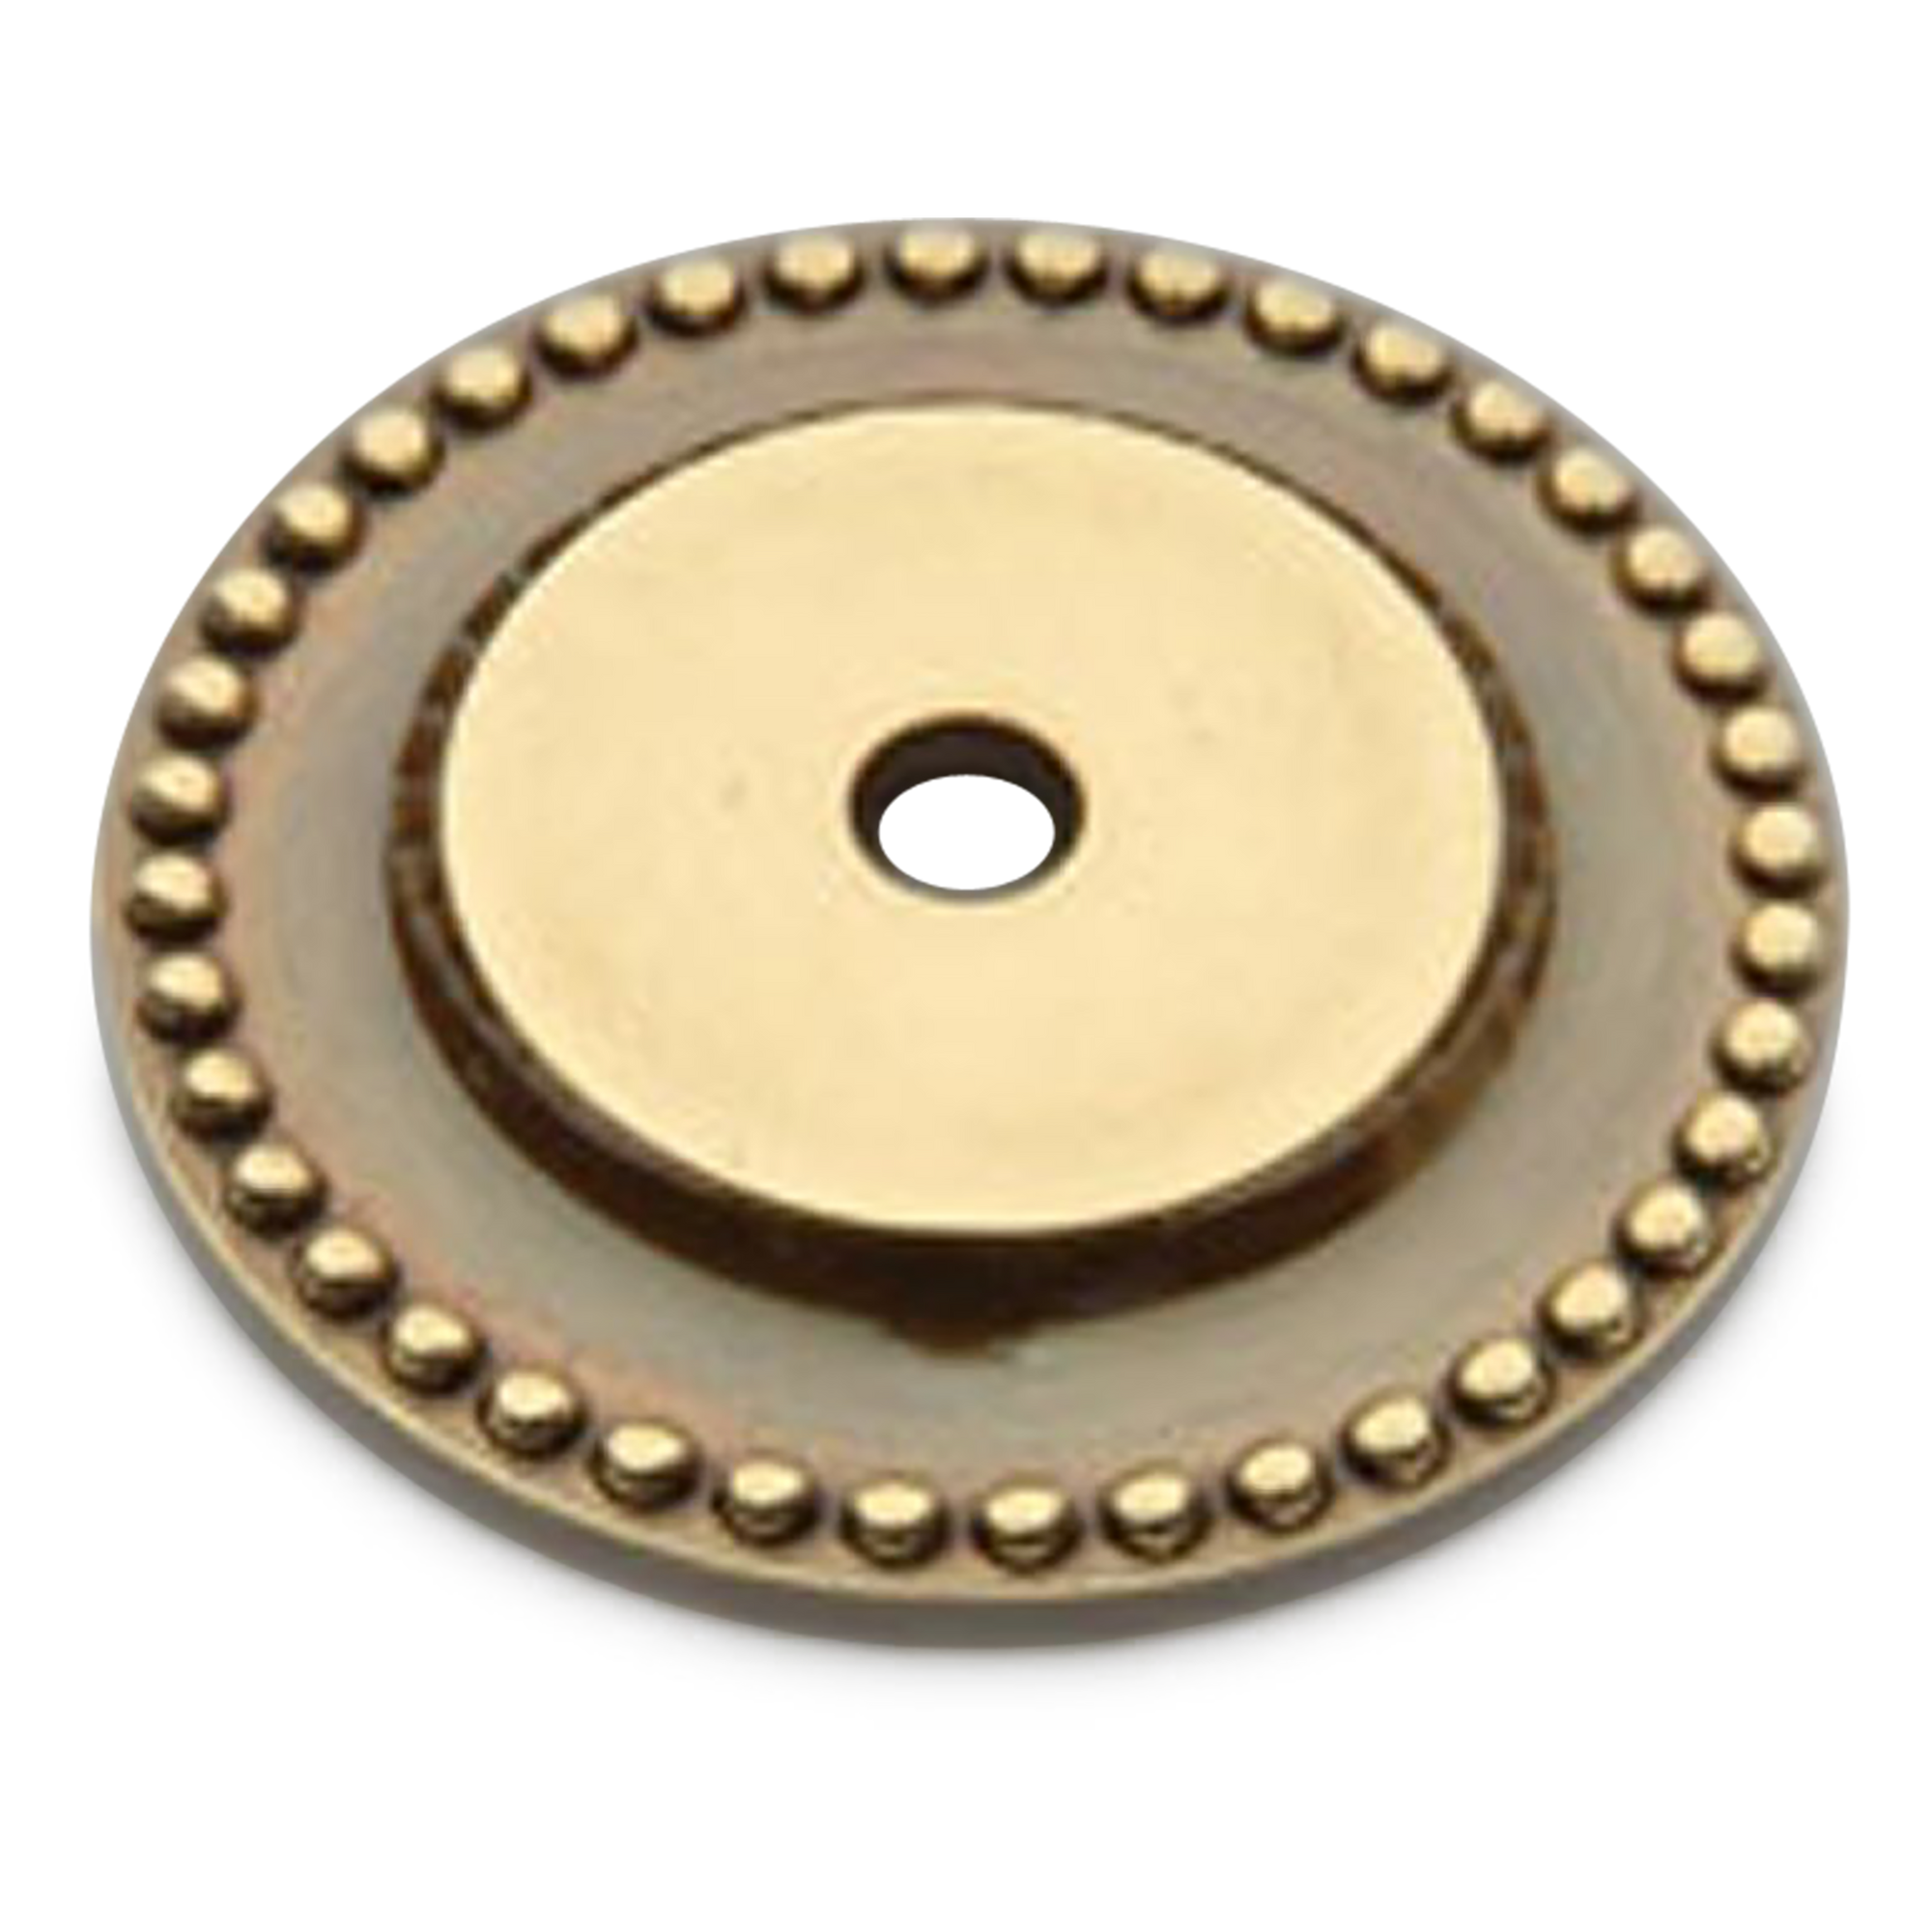 A traditional round back plate with raised chain details.